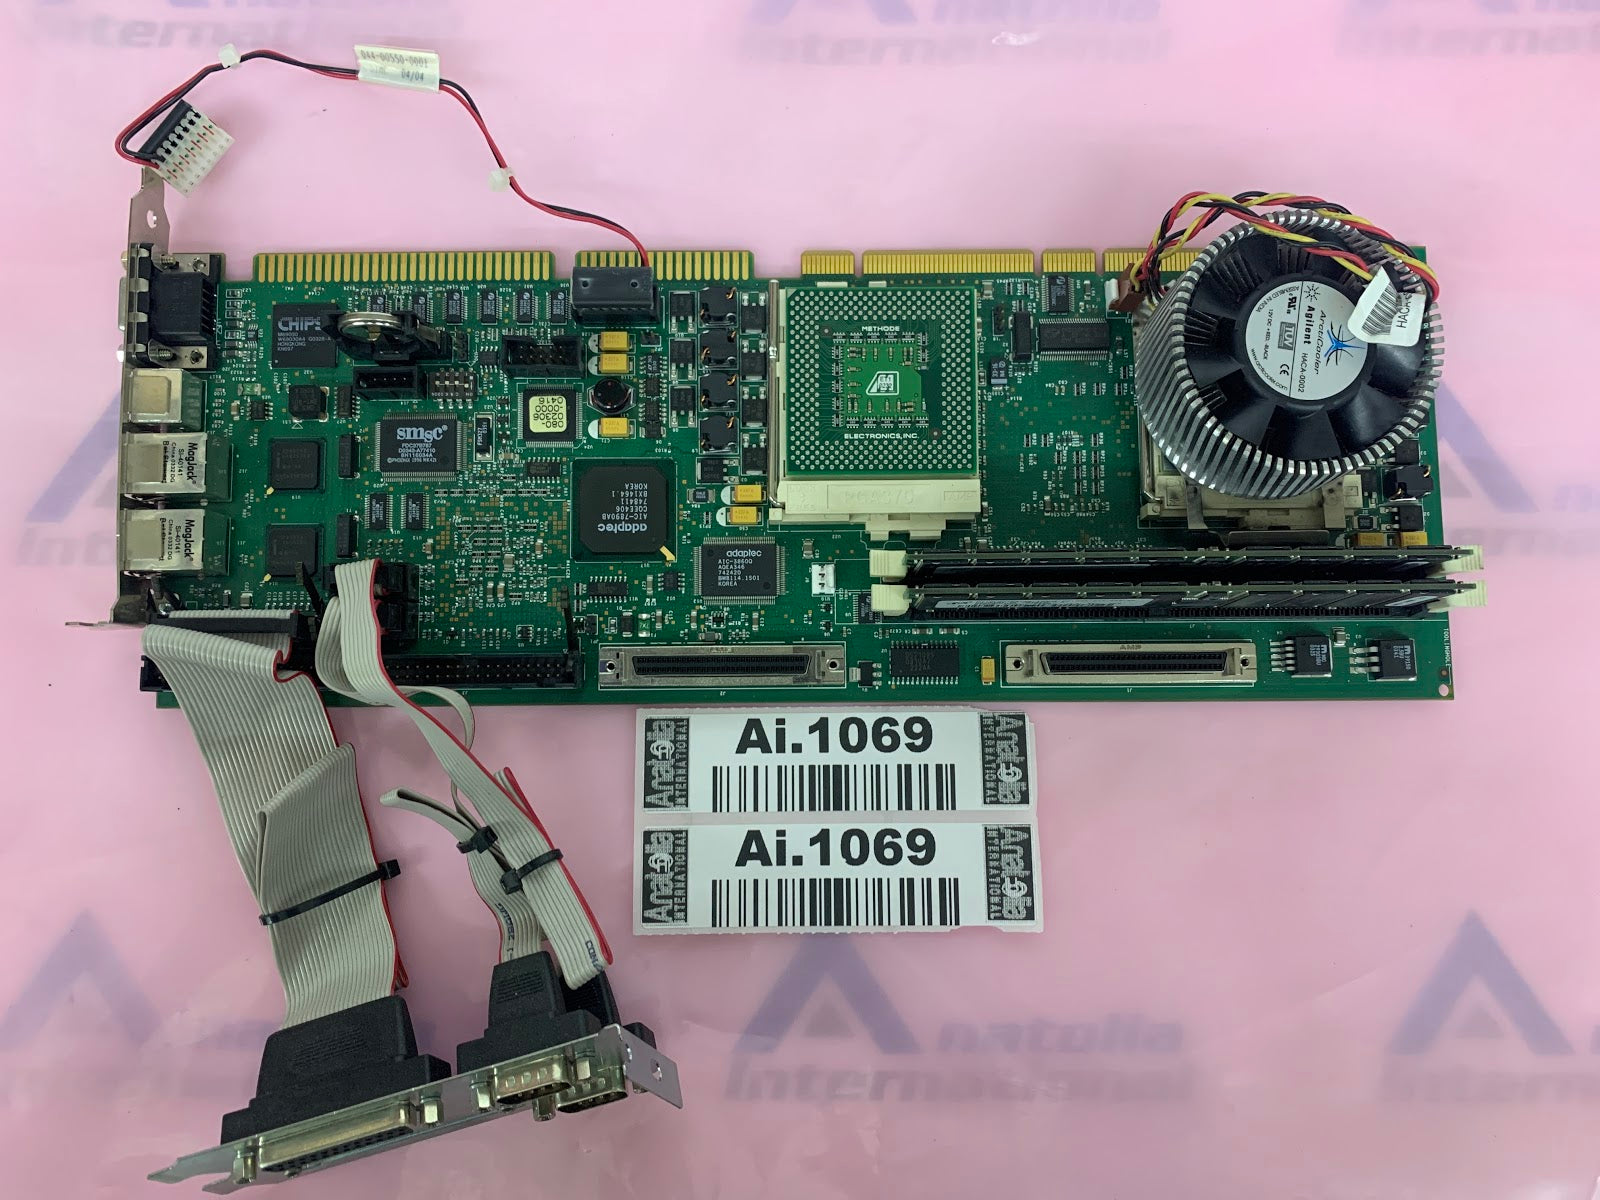 Single Board Computer SBC For Philips Allura xPer FD10 P/N: 067-02845-0007 
Rev 00
061-01453 – 0024
Rev 00. Pulled from functioning Equipment, contact for more info.